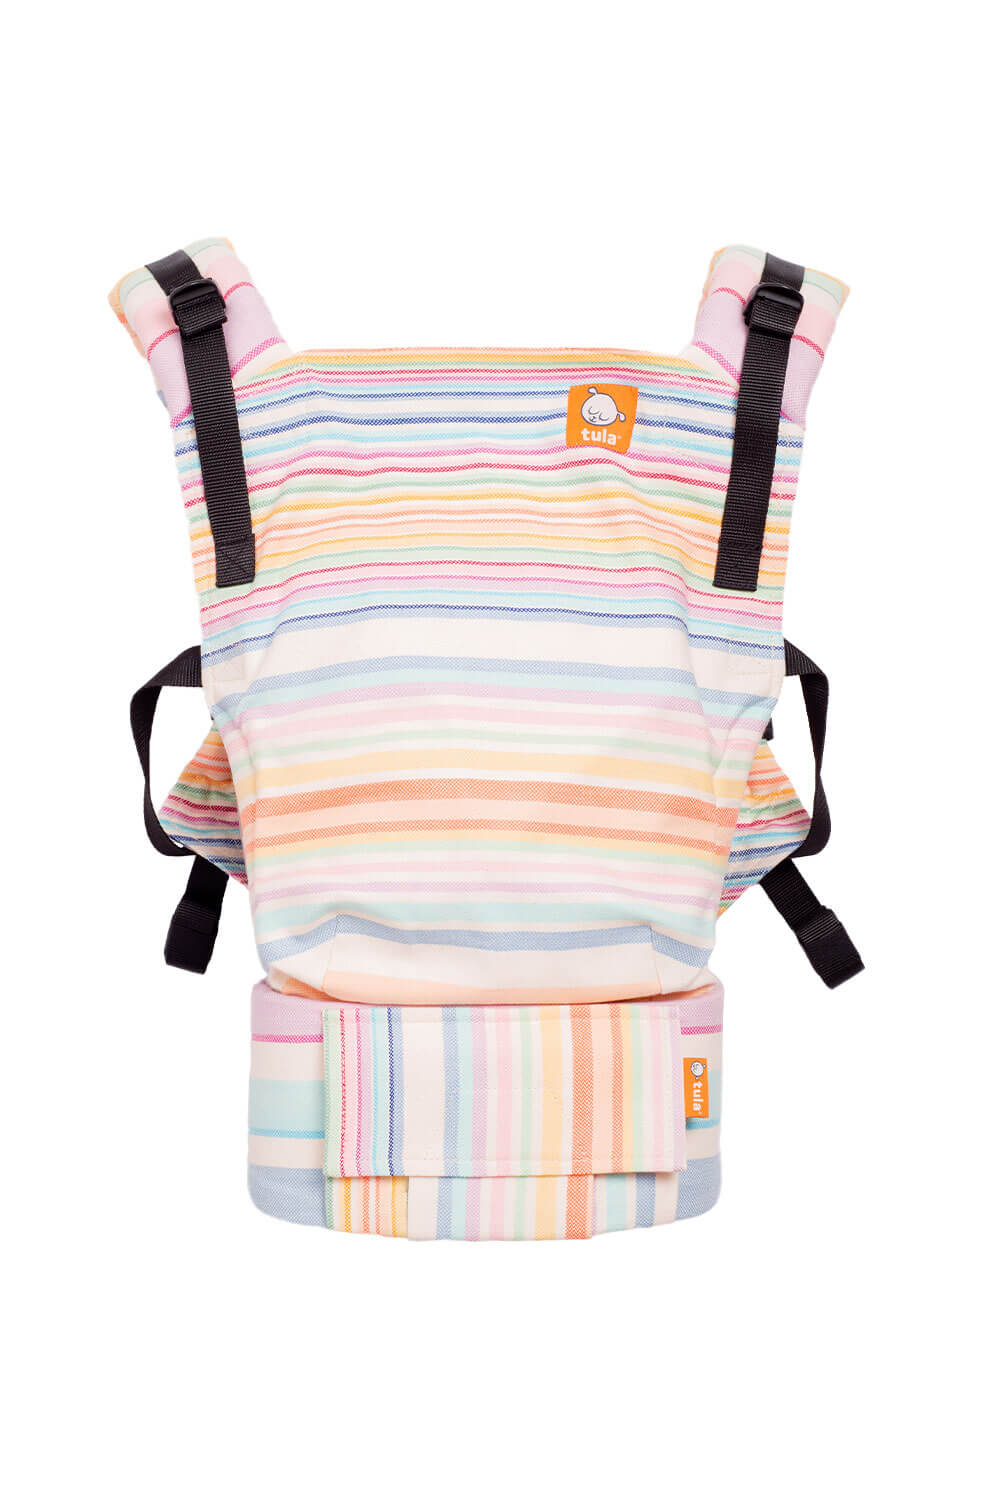 Fericire - Signature Handwoven Free-to-Grow Baby Carrier